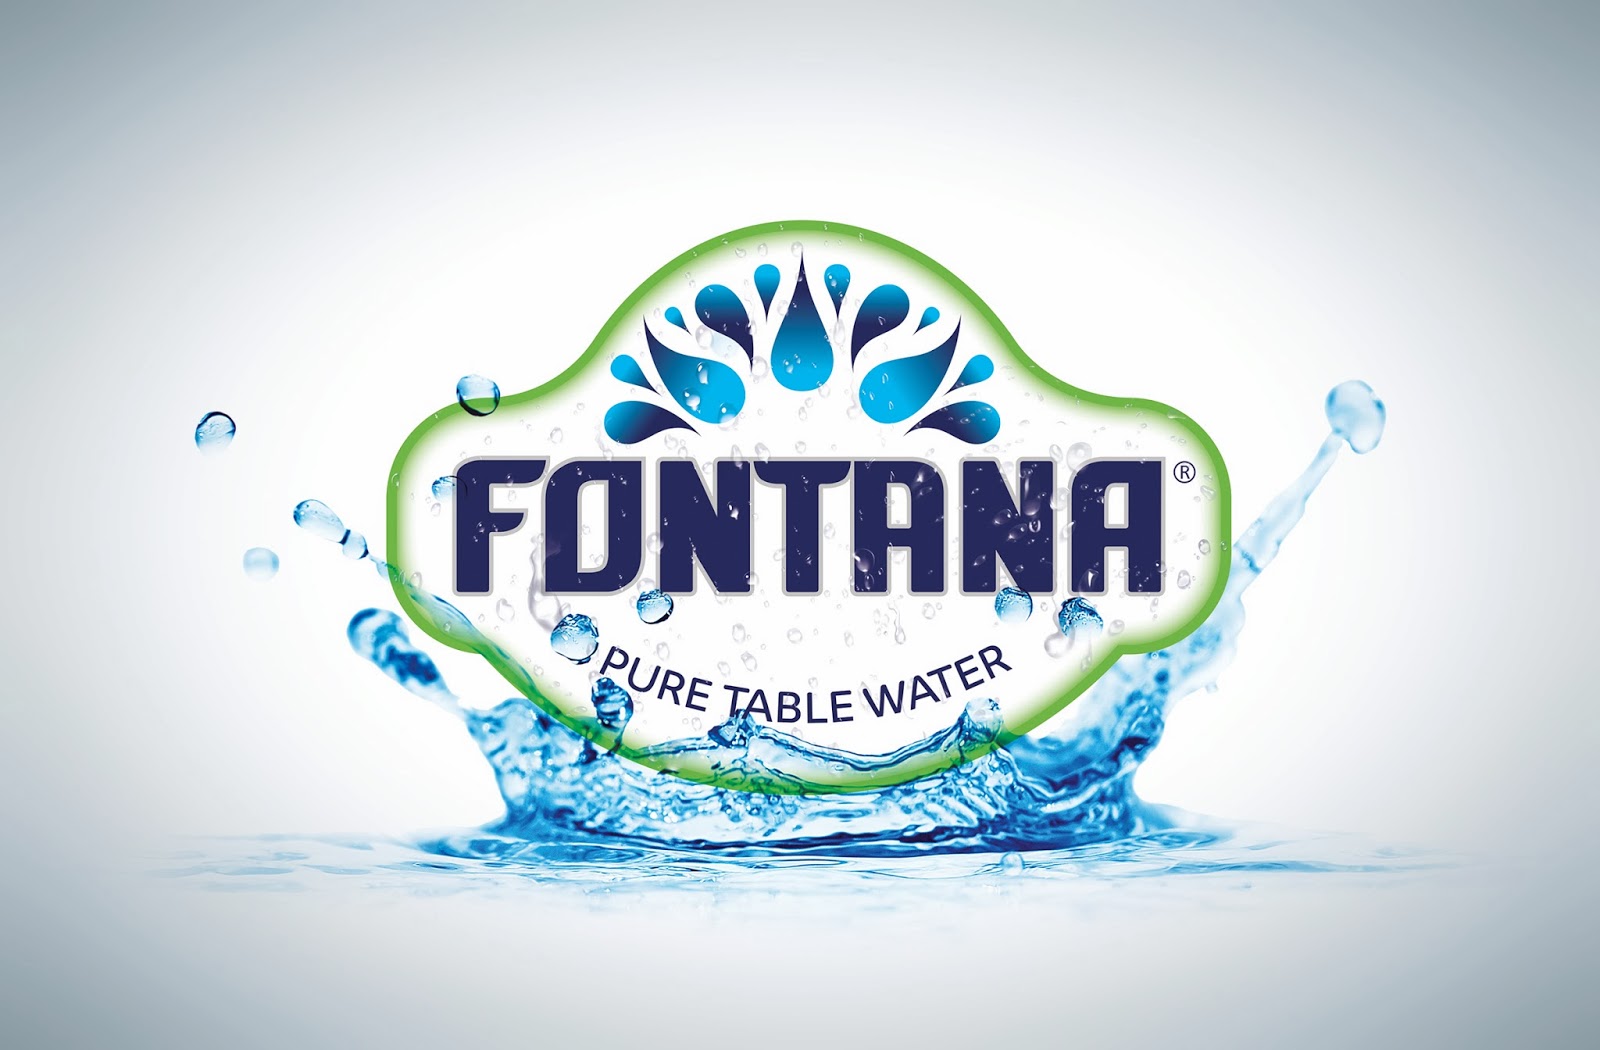 fontana-pure-table-water-on-packaging-of-the-world-creative-package